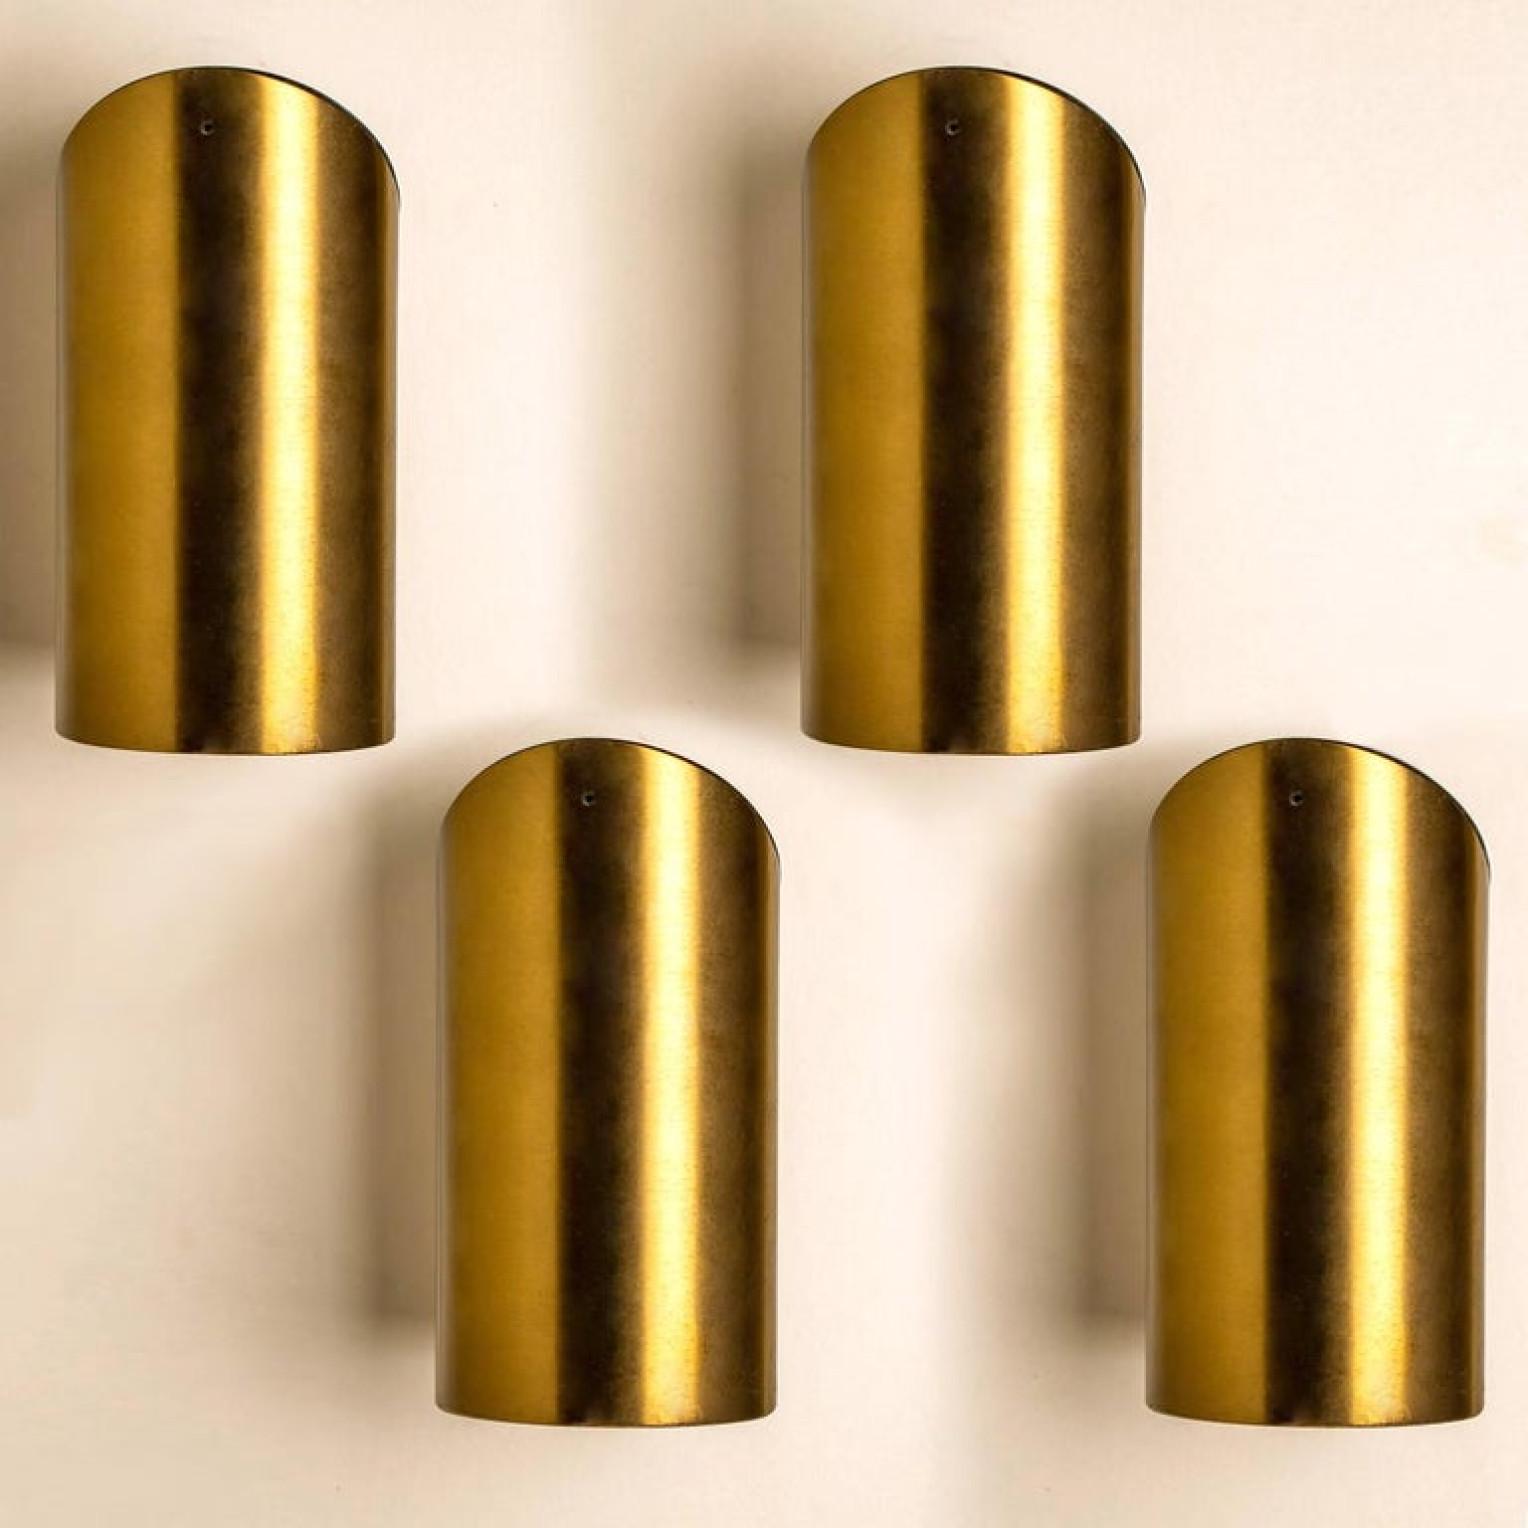 Four solid brass pieces three 